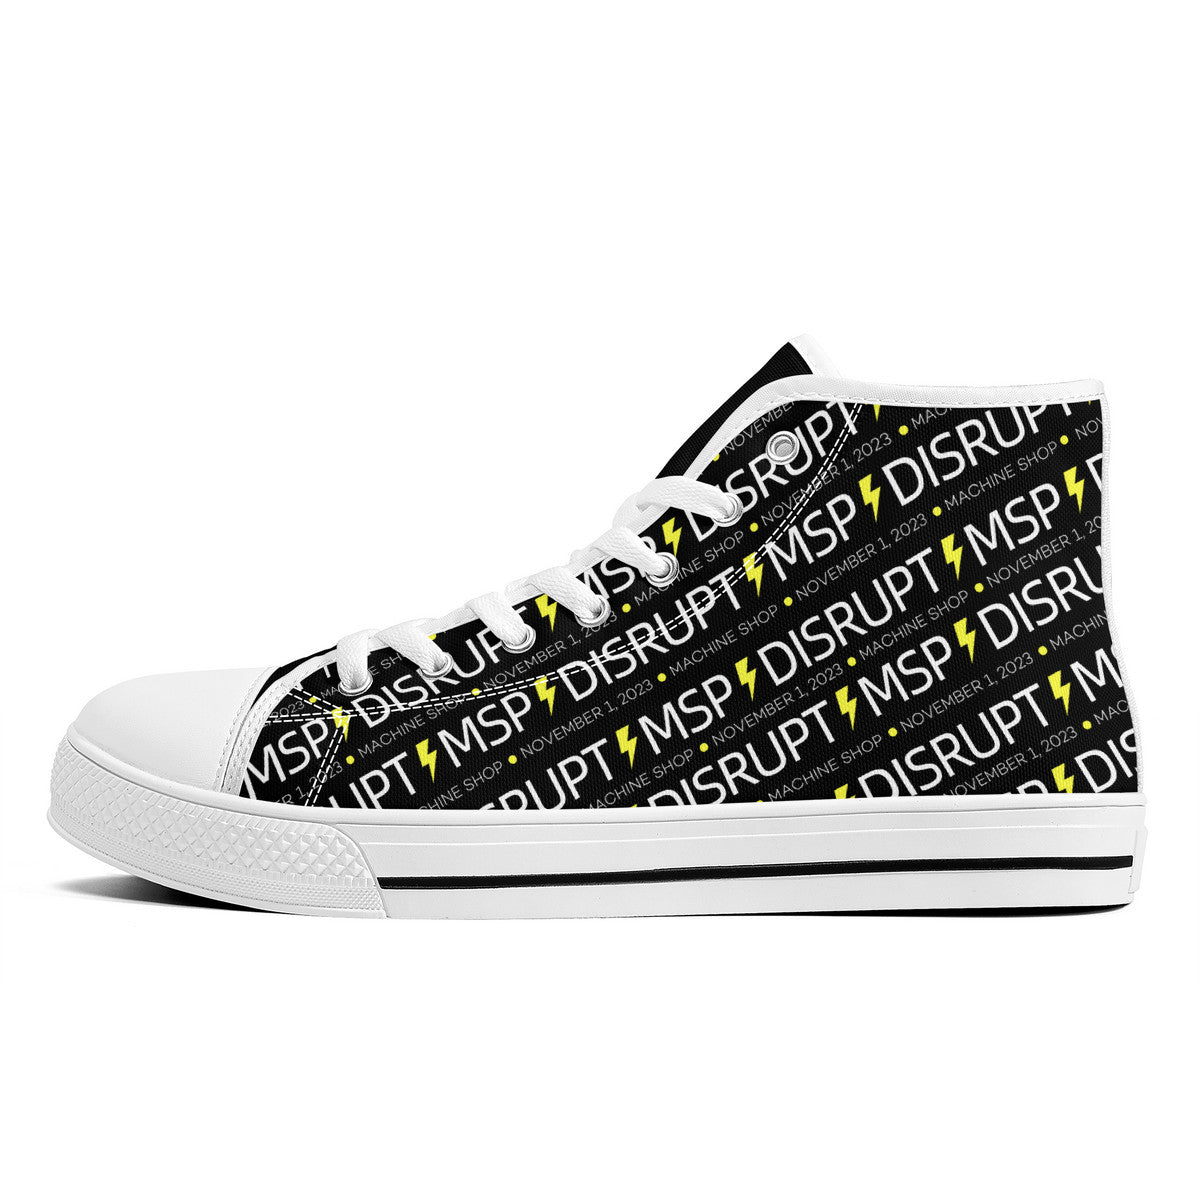 Disrupt HR | Business Conference Custom Shoes